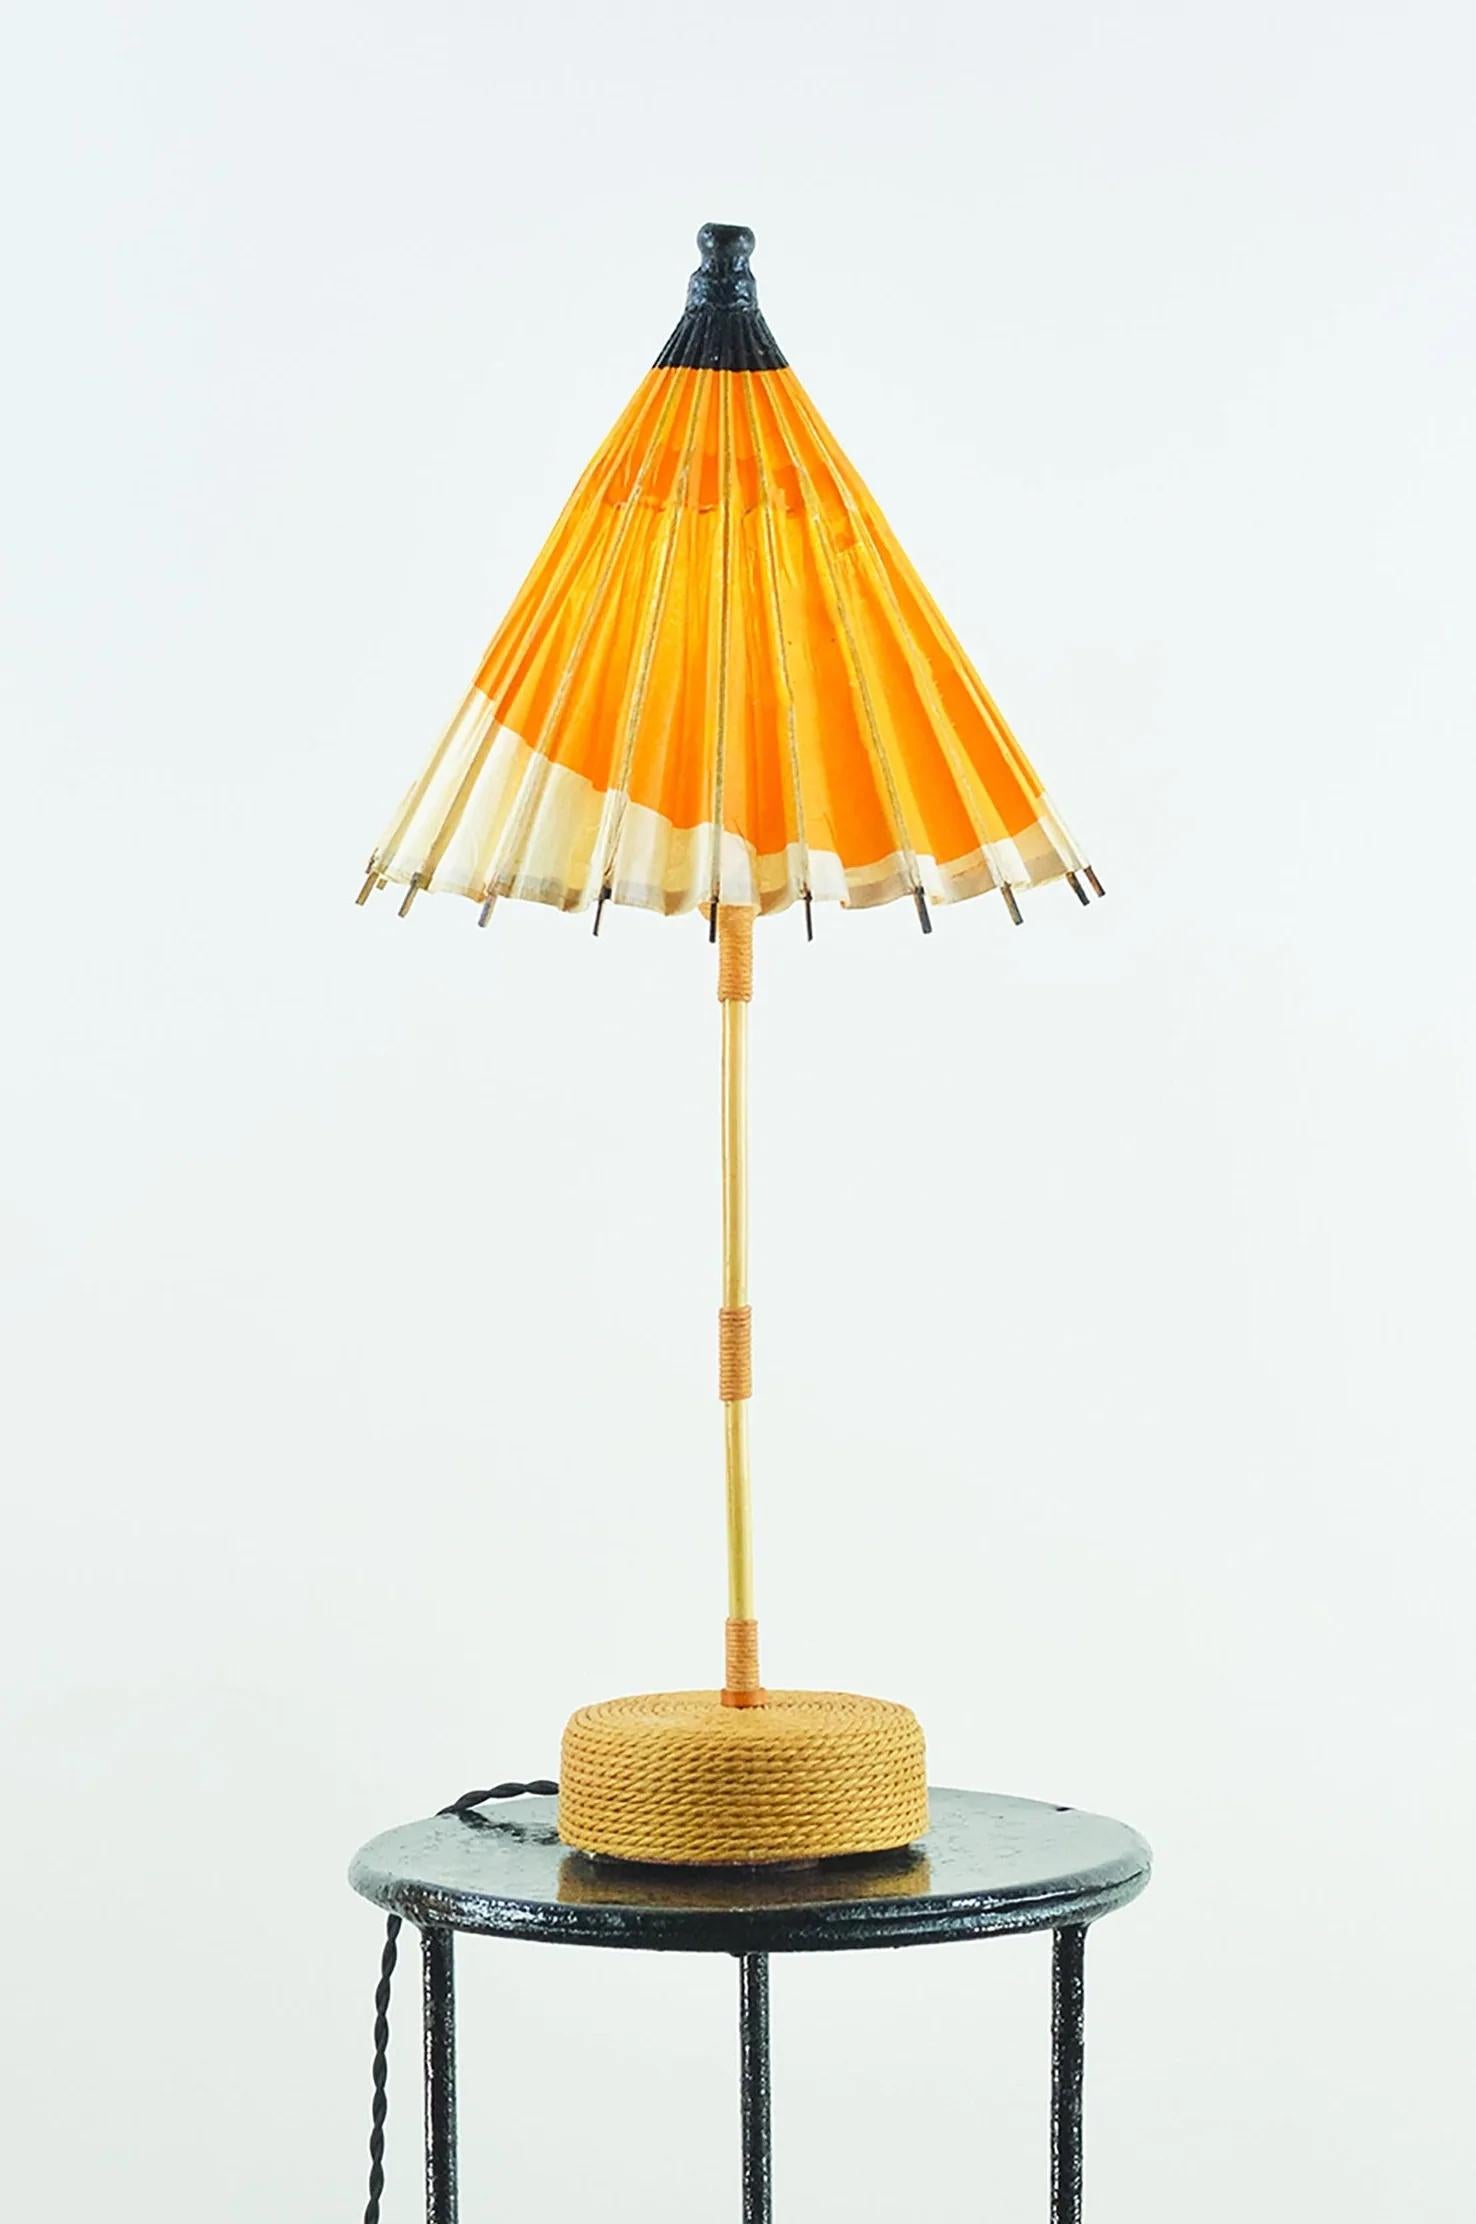 The World’s Fair Collection is a family of fixtures handmade from sustainably sourced materials and upcycled antique paper parasols given to visitors at the 20th century’s most illustrious cultural expo.

Model No. 004A features a faded orange